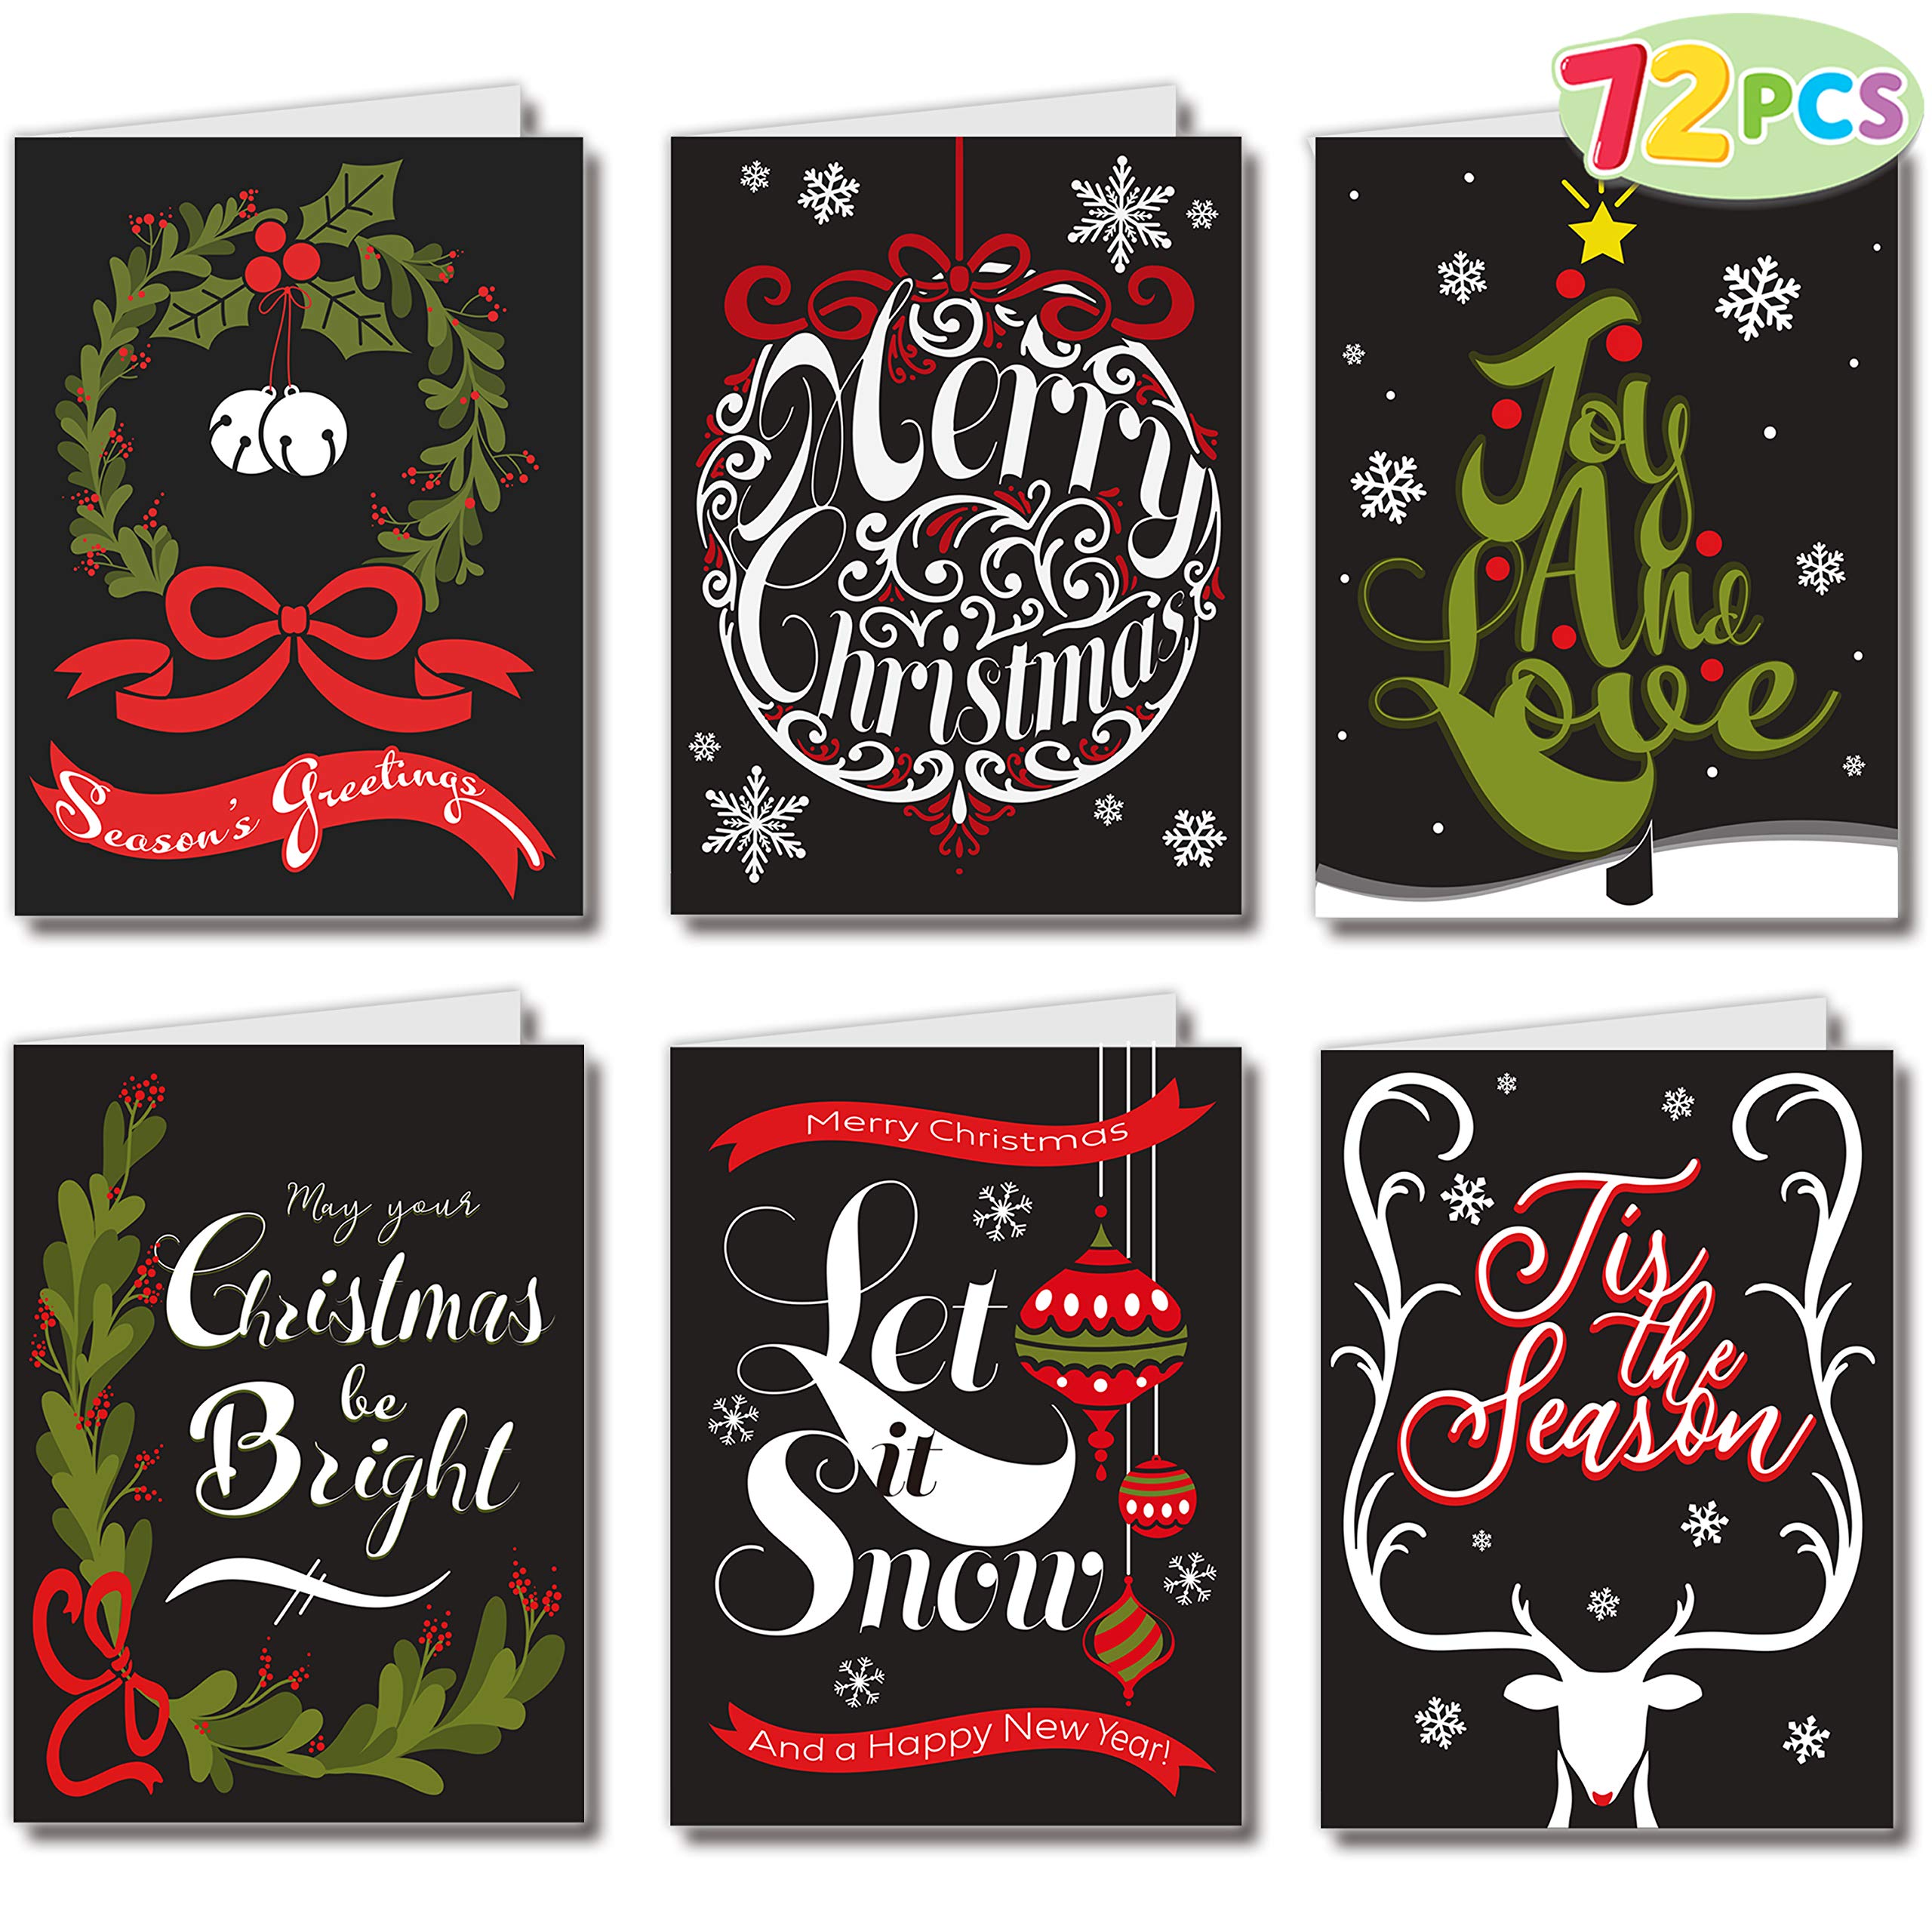 JOYIN 72 Piece Holiday Christmas Greeting Cards with 6 Artistic Greeting Designs & Envelopes 6.25” x 4.6